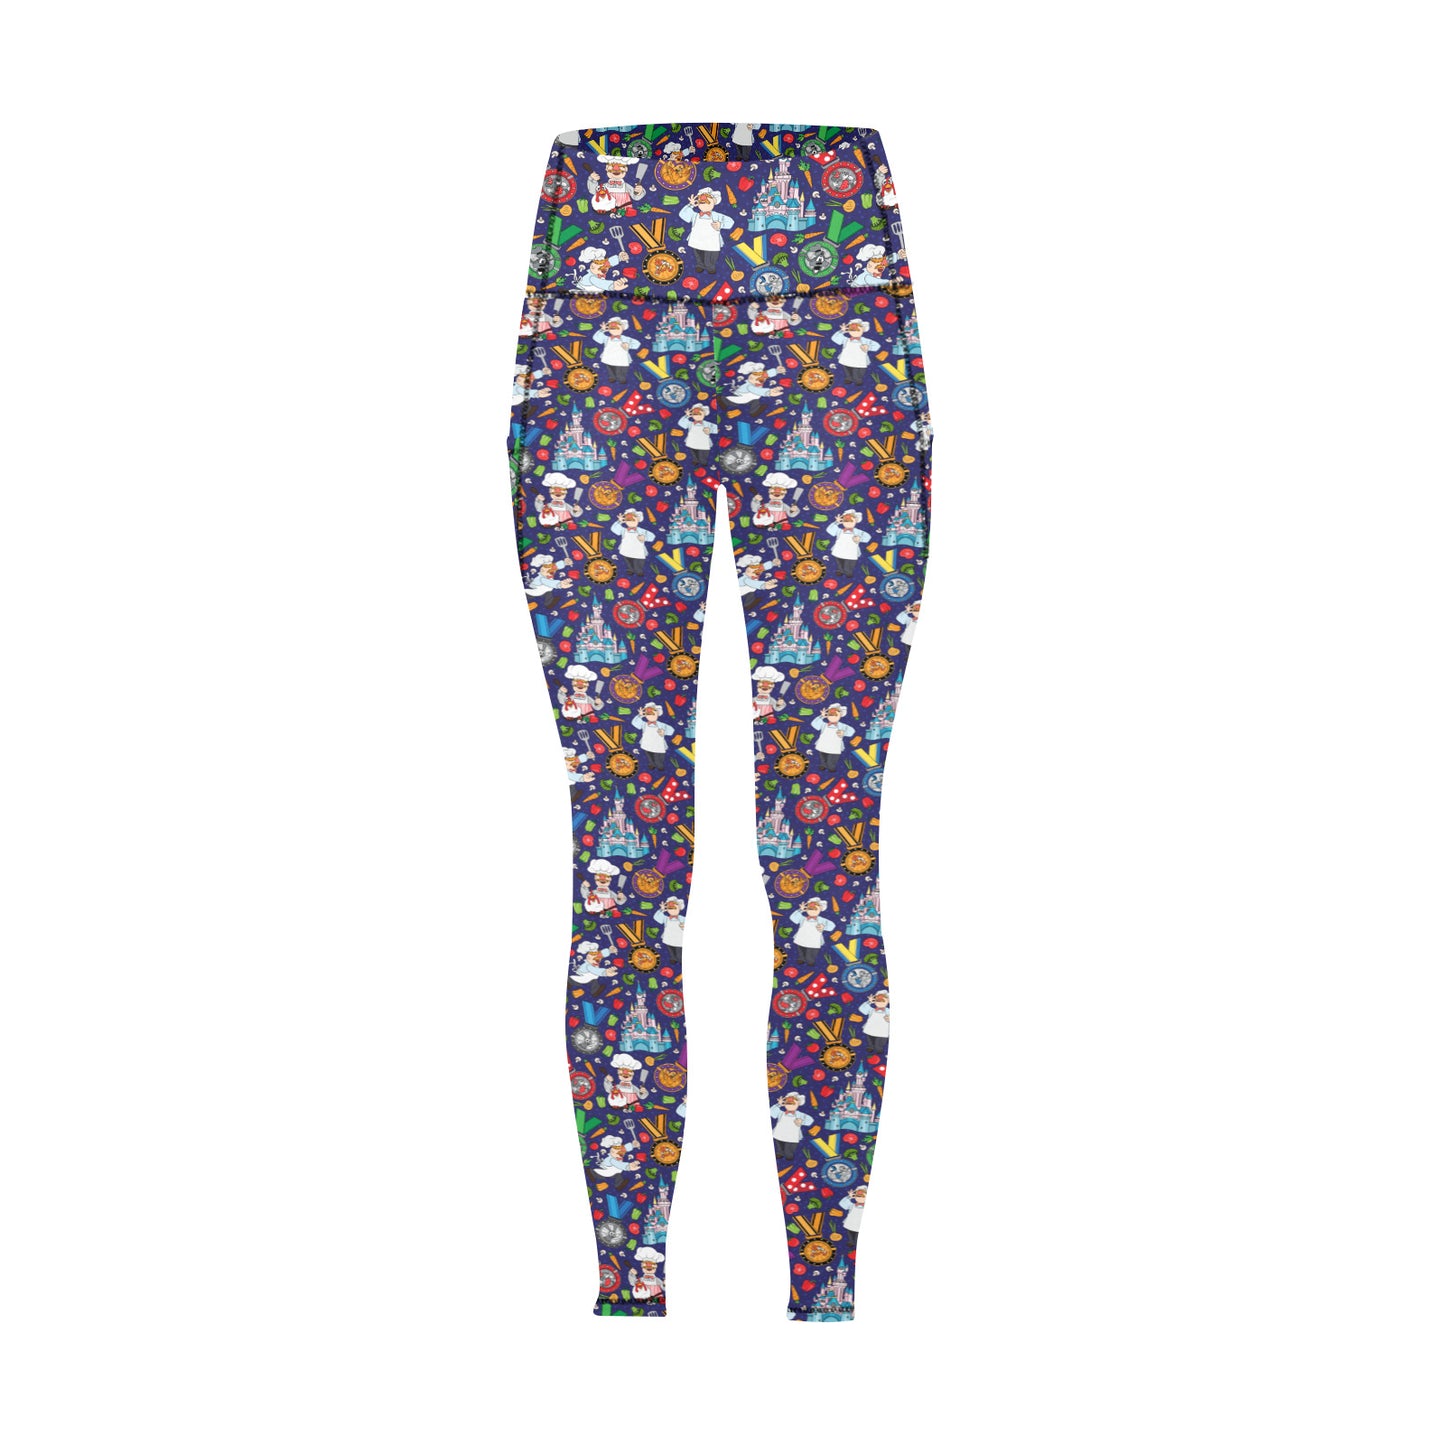 Muppets Chef Wine And Dine Race Women's Athletic Leggings Wth Pockets